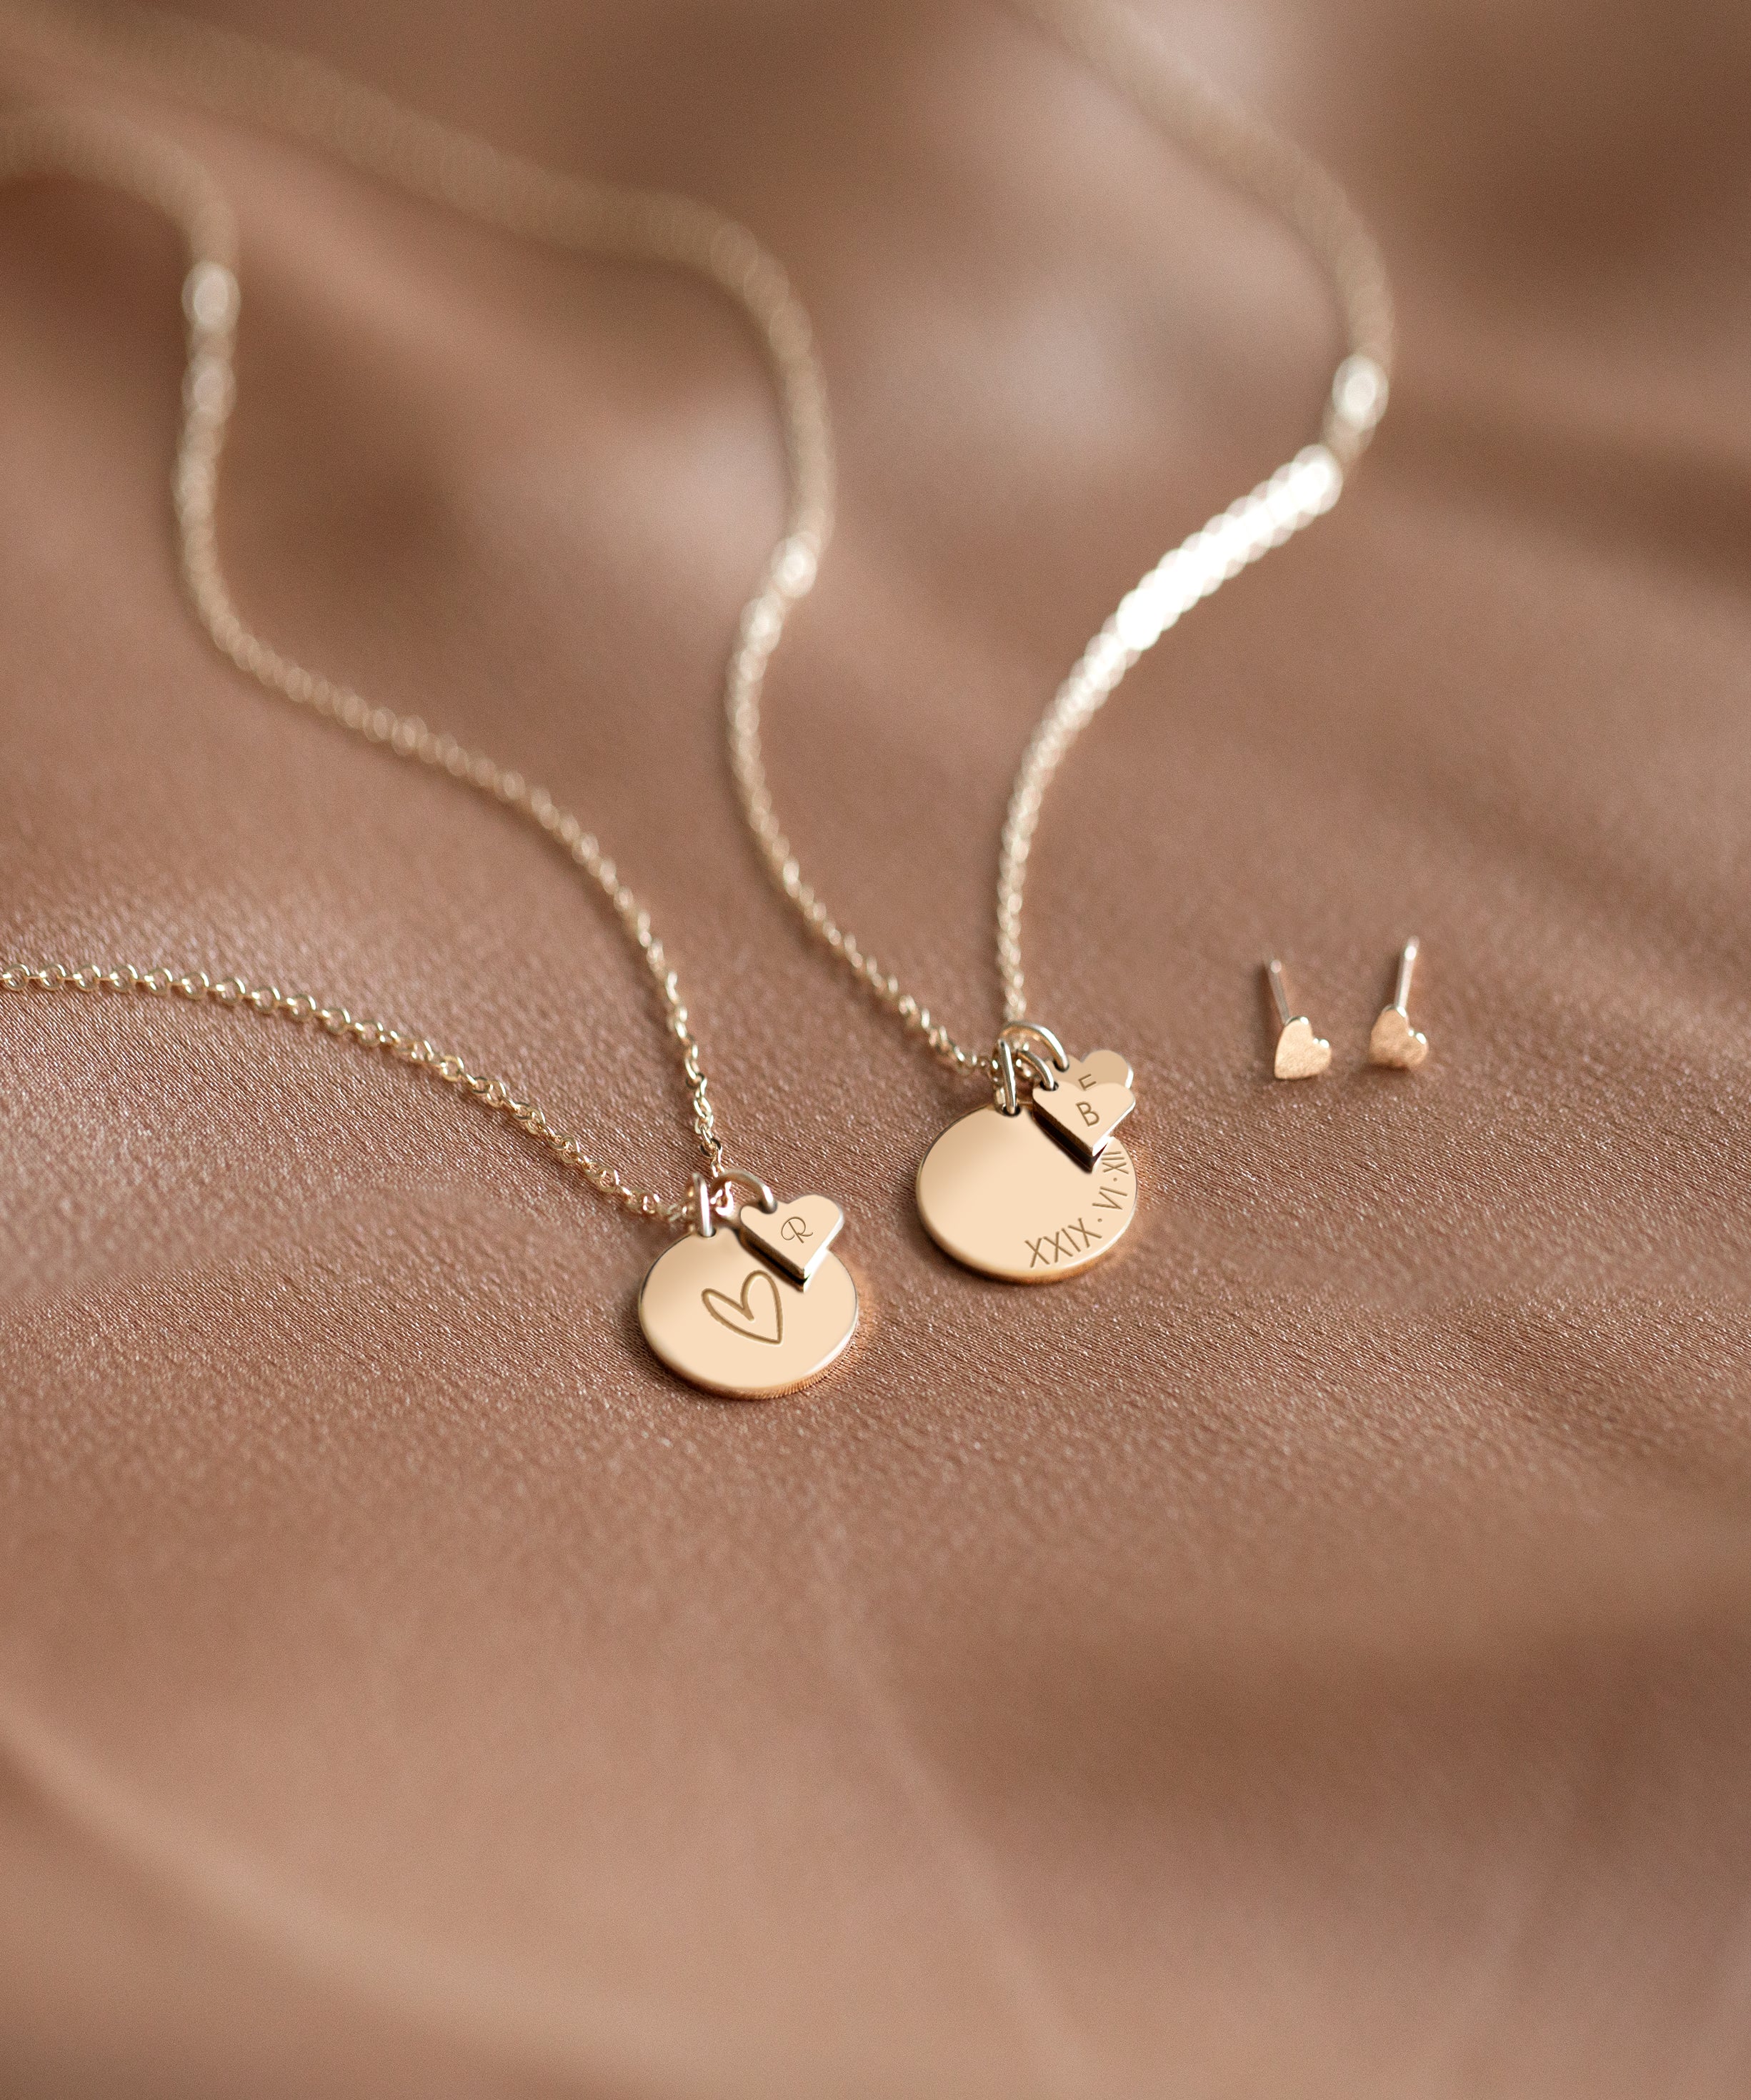 Personalised Medium Yara Disk & Heart Necklace<br> <FONT SIZE="1px">ADD UP TO 5 HEARTS</br></font>